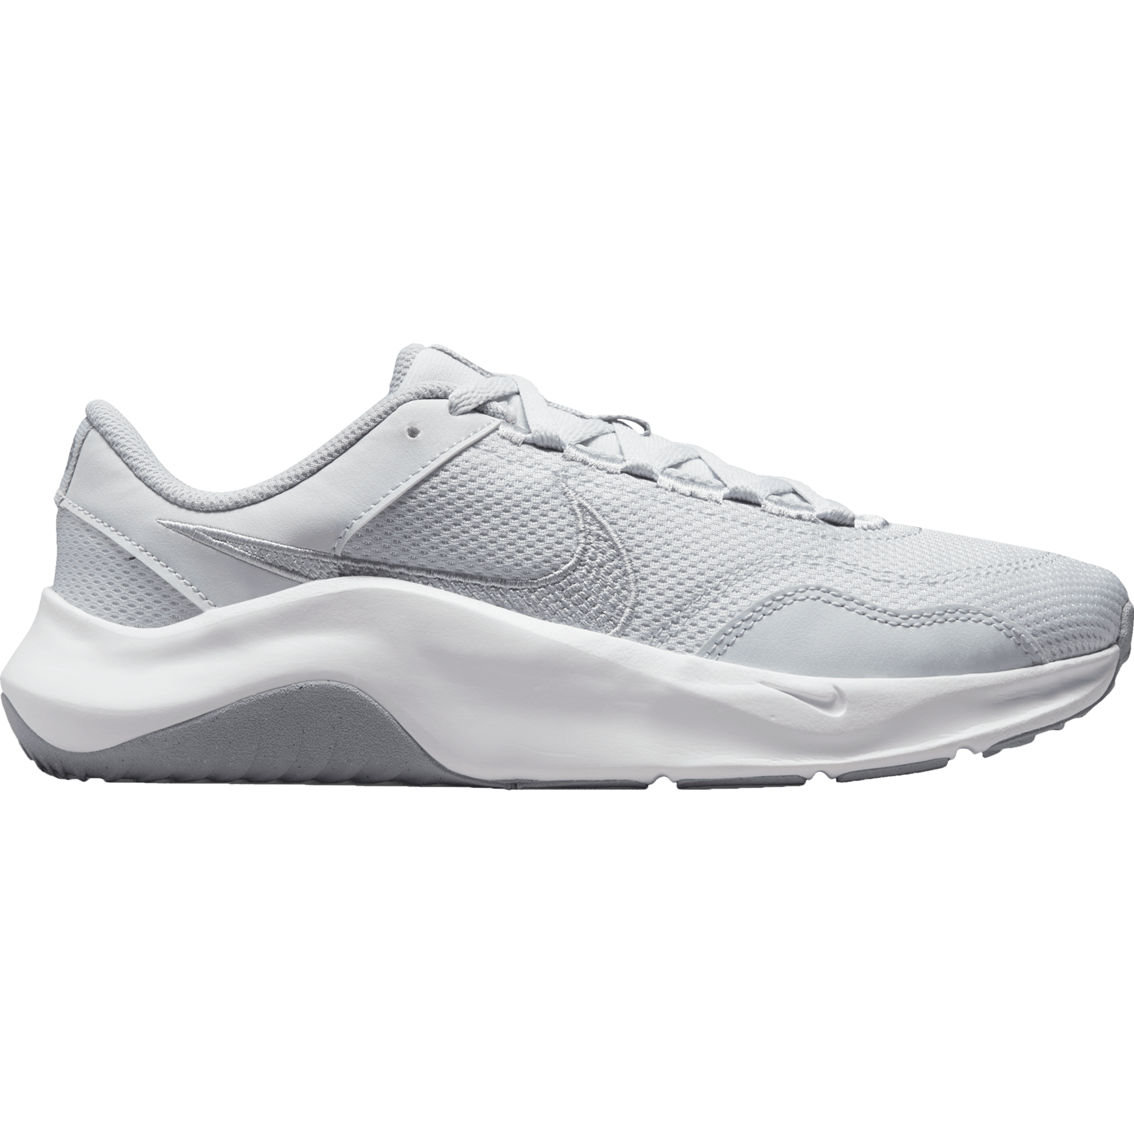 Nike Women's Legend Essential 3 Training Shoes - Image 2 of 8